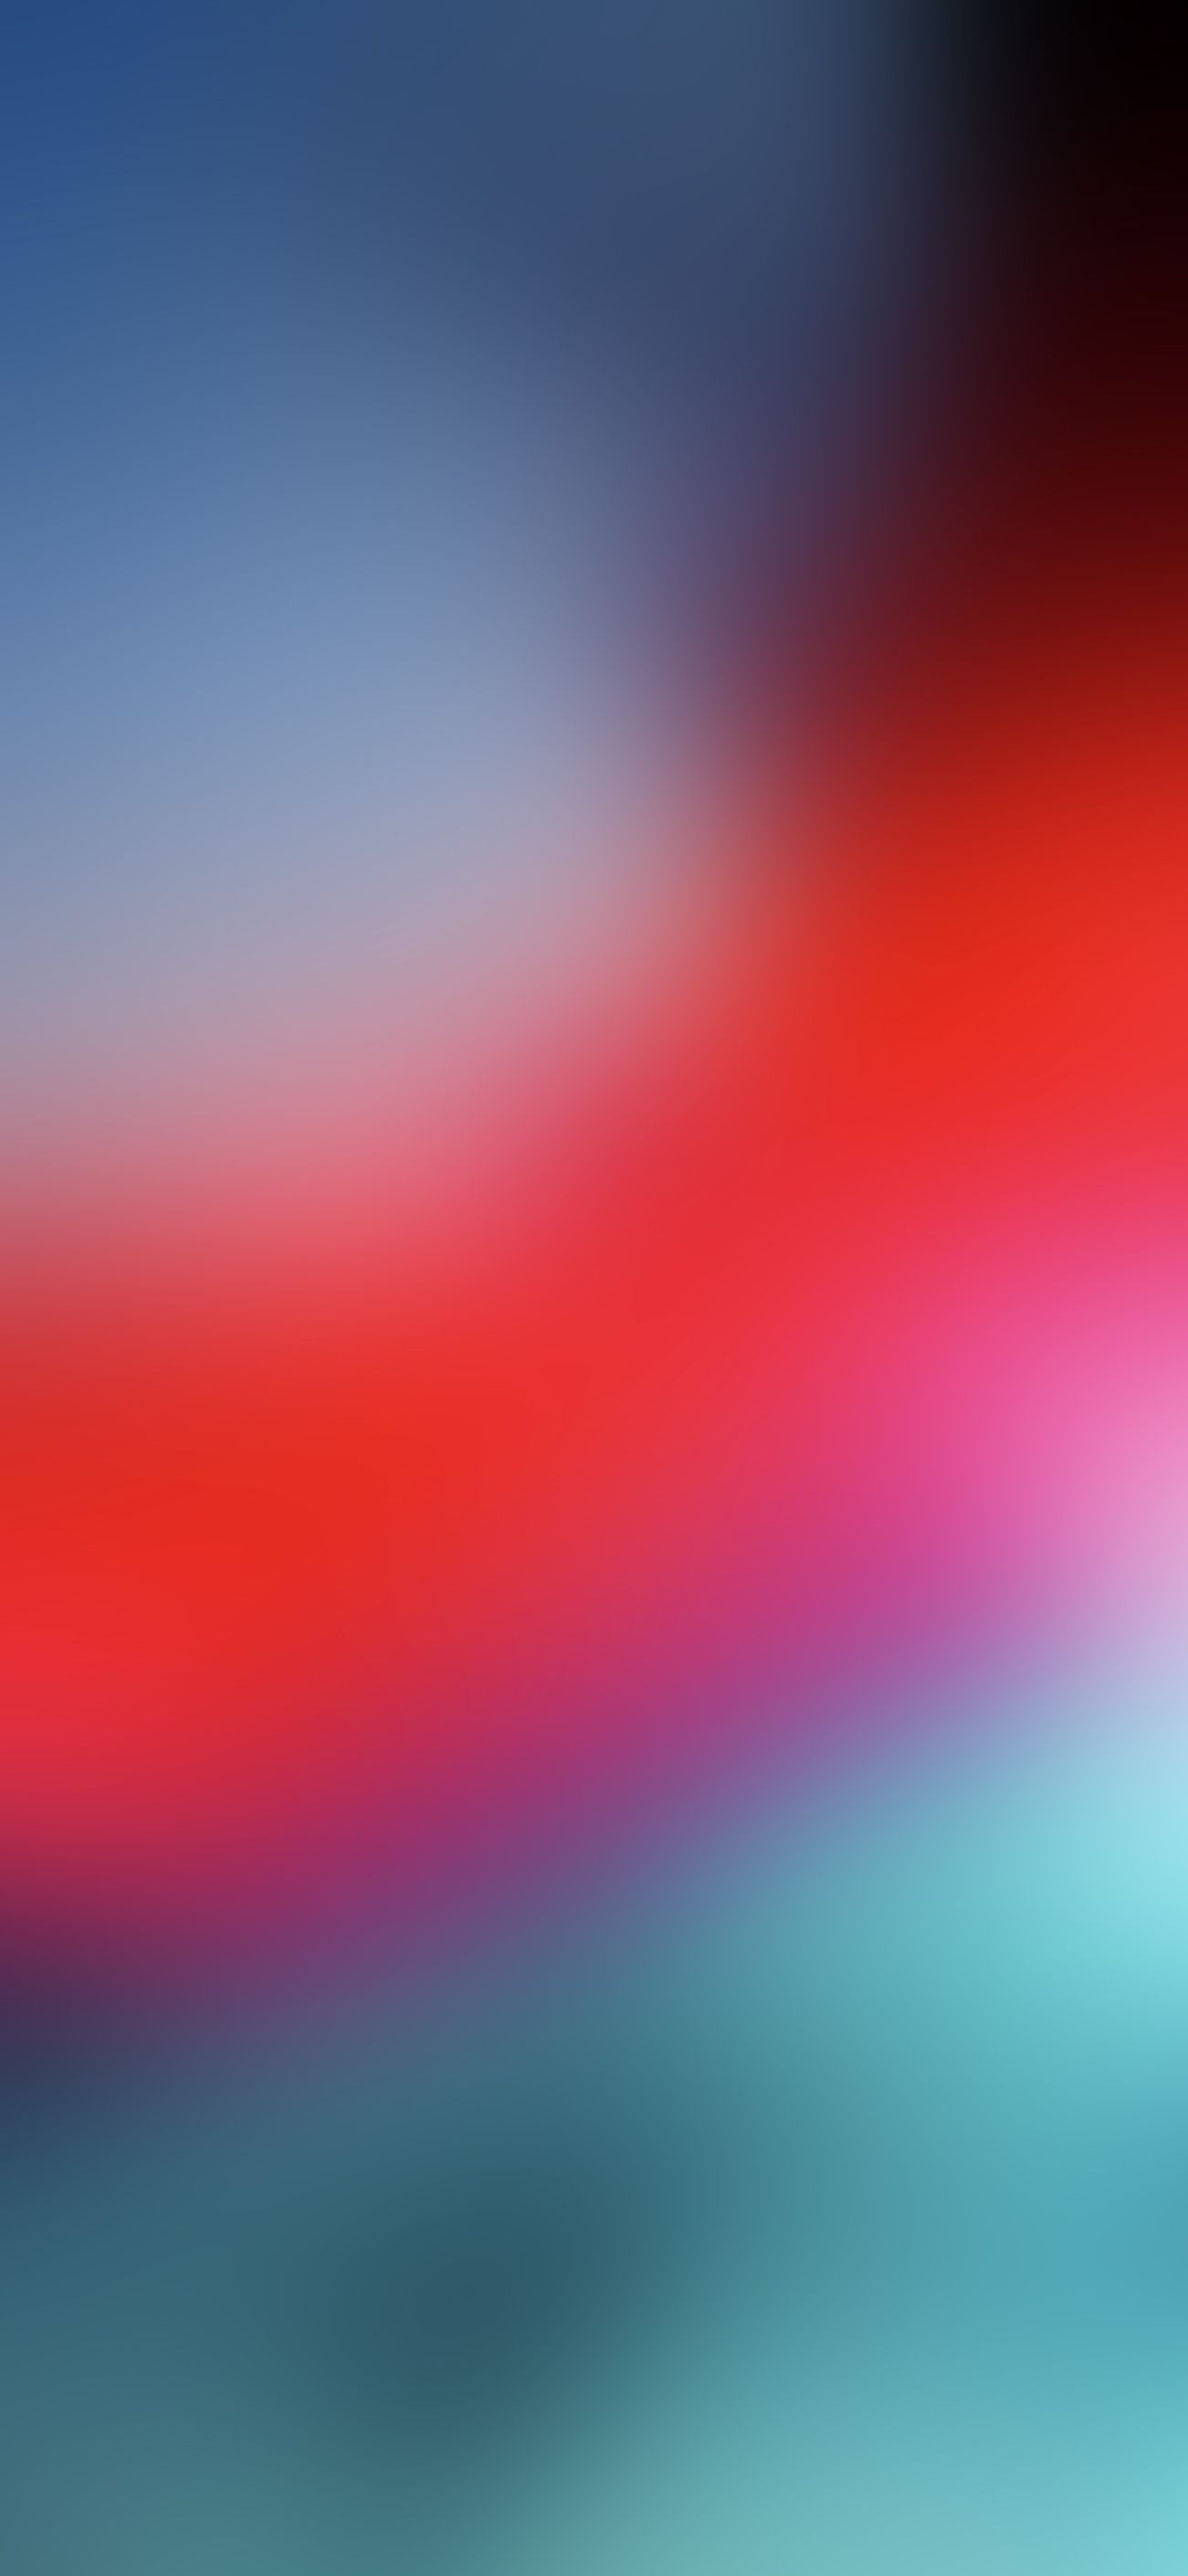 Ios 12 Wallpapers posted by Ethan Thompson